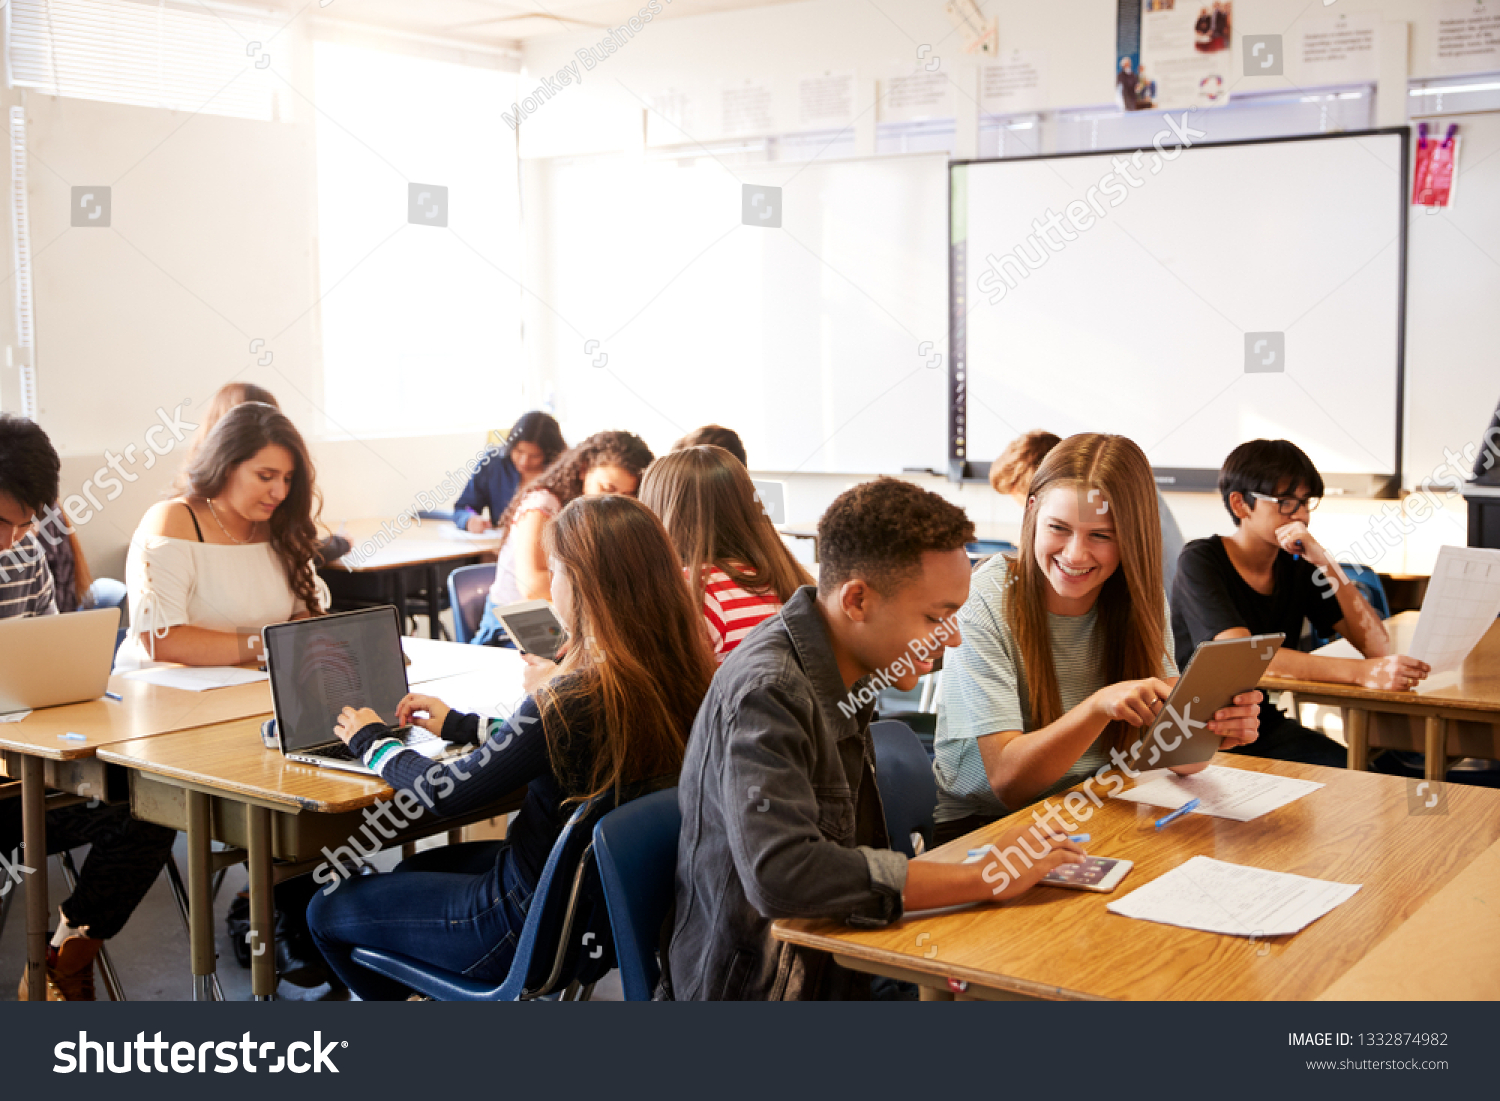 Wide Angle View Of High School Students Sitting At Desks In Classroom Using Laptops #1332874982